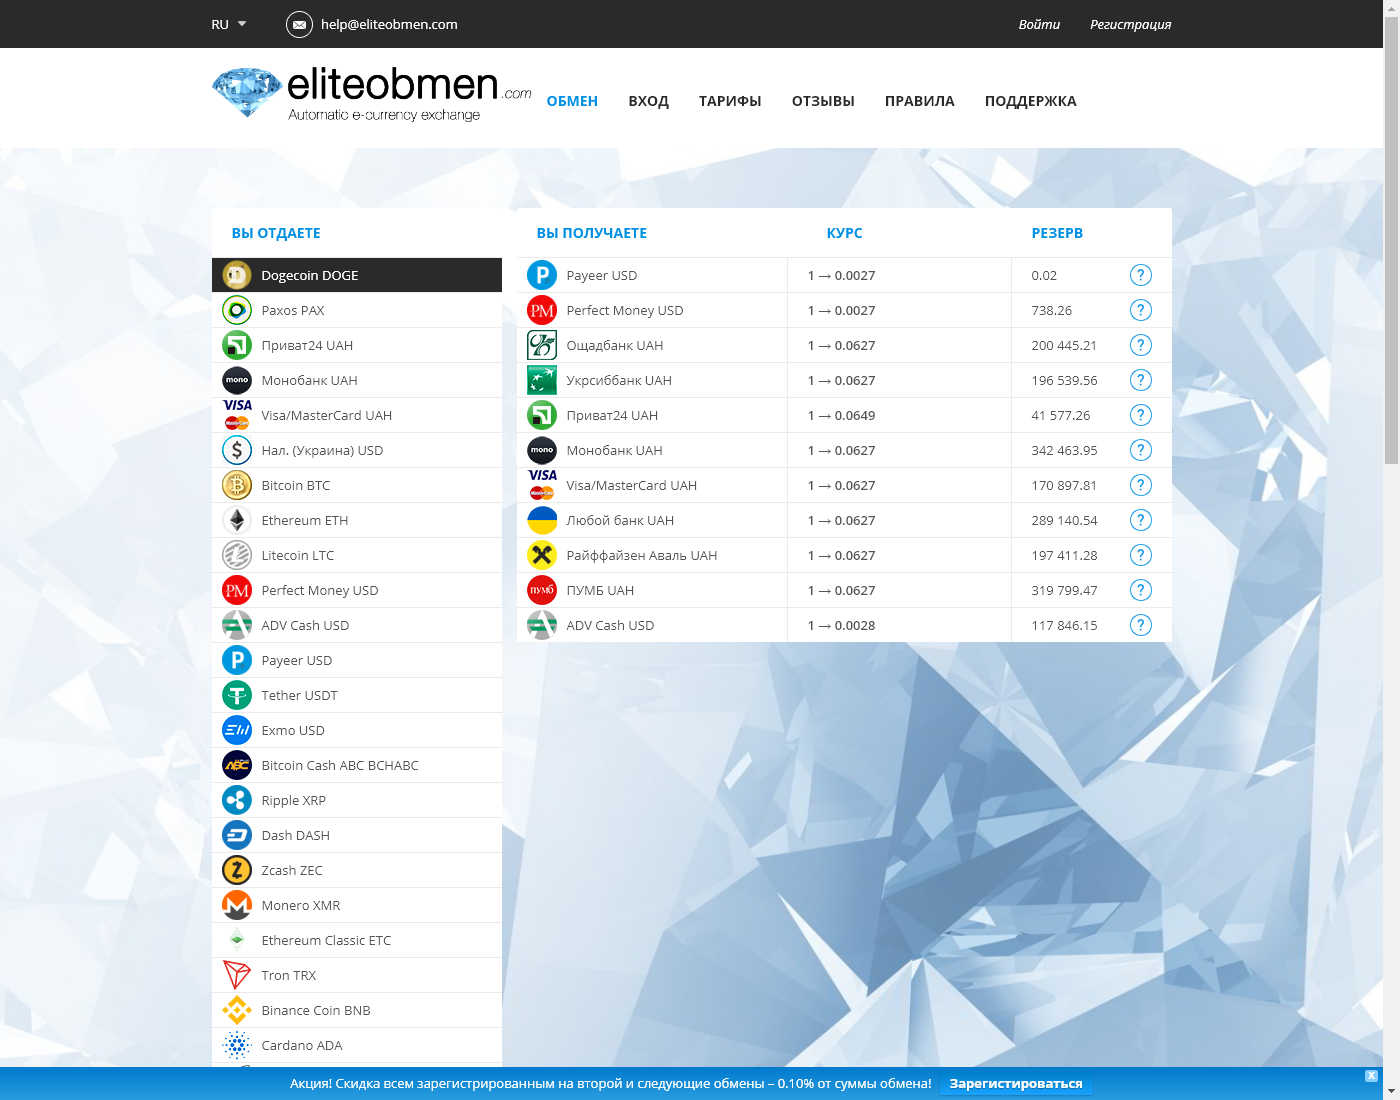 EliteObmen user interface: the home page in English